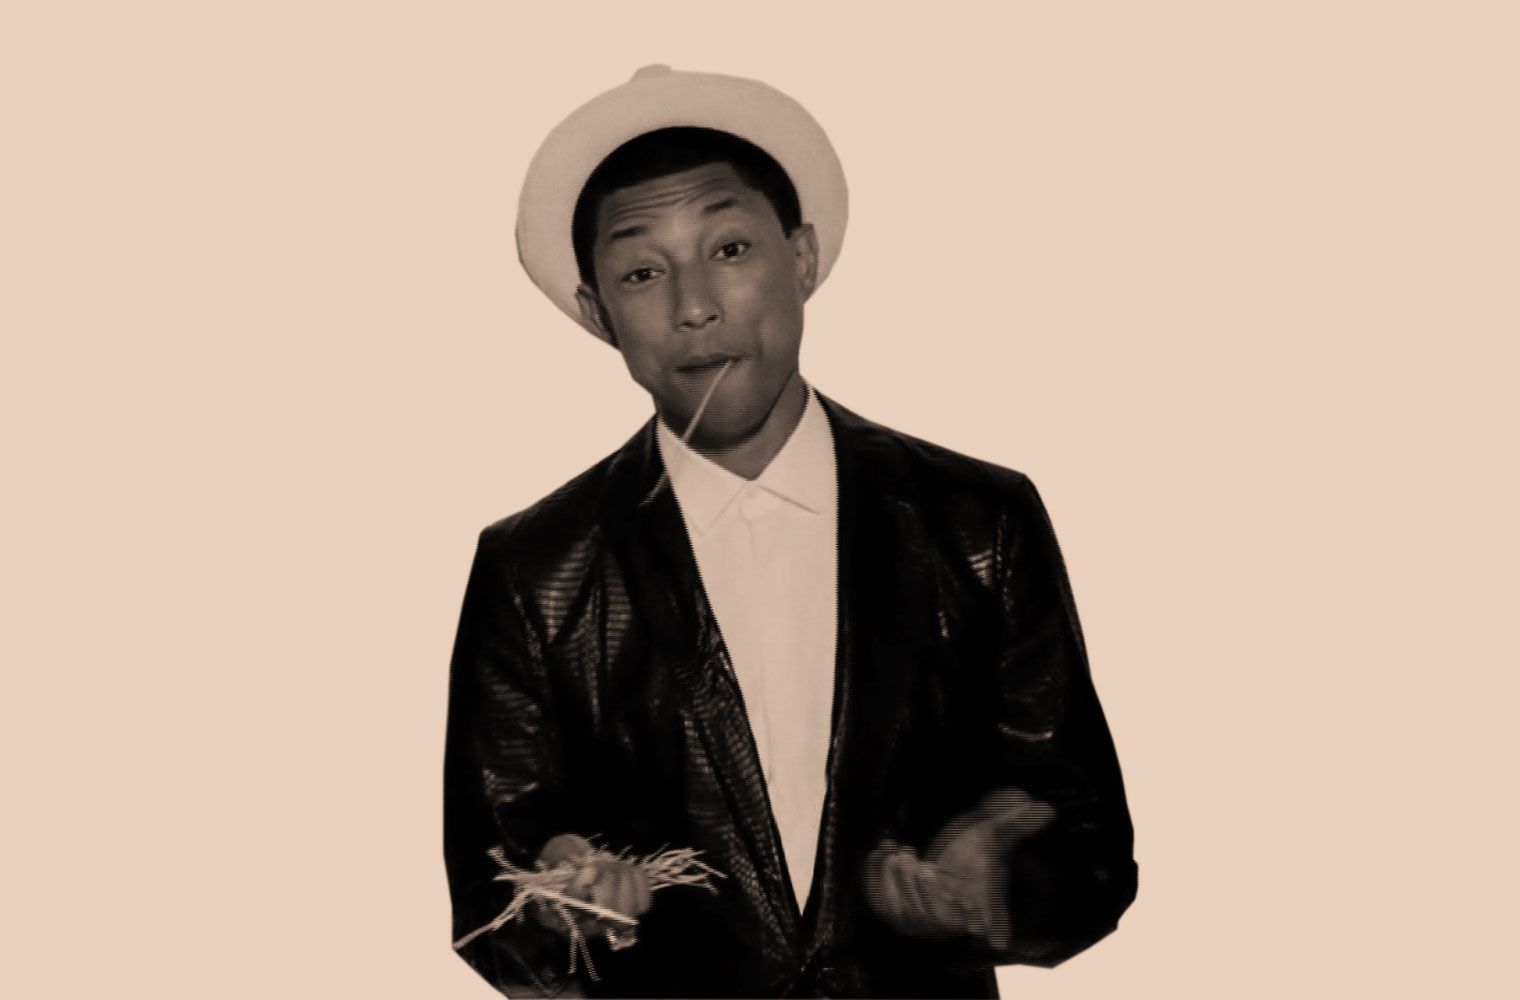 You're Not The Only Person Who's Noticed Pharrell Williams Doesn't